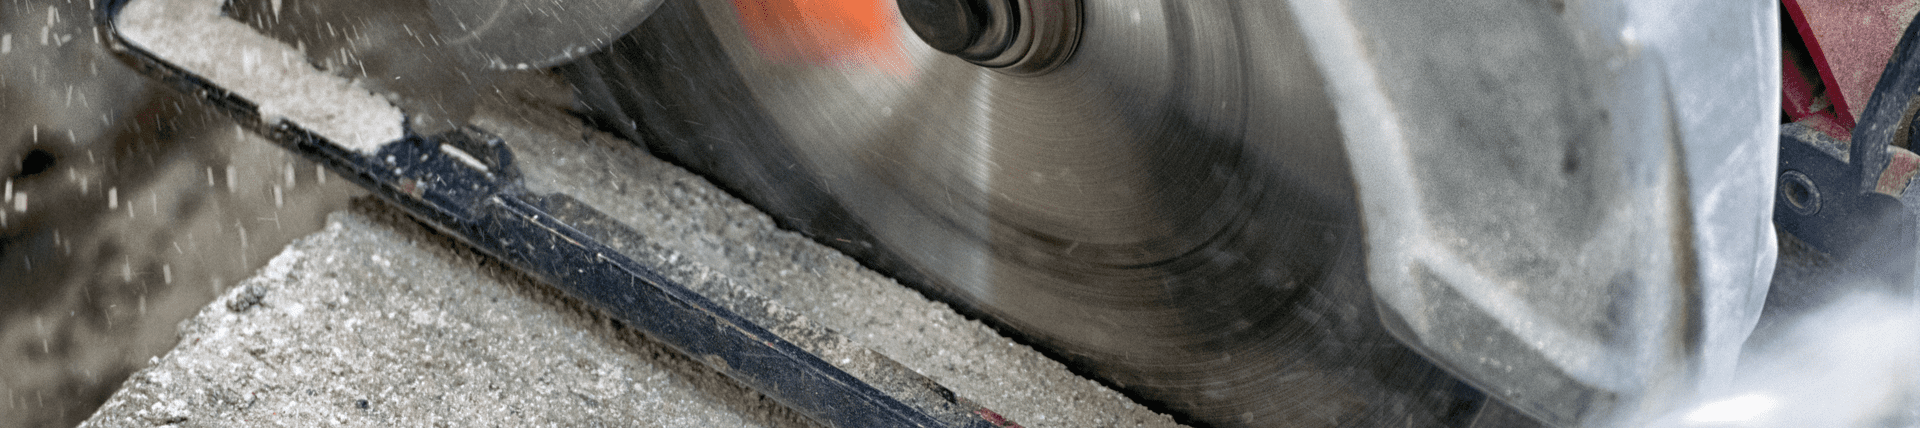 New Crystalline Silica Dust Rule By OSHA Now in Effect/2018